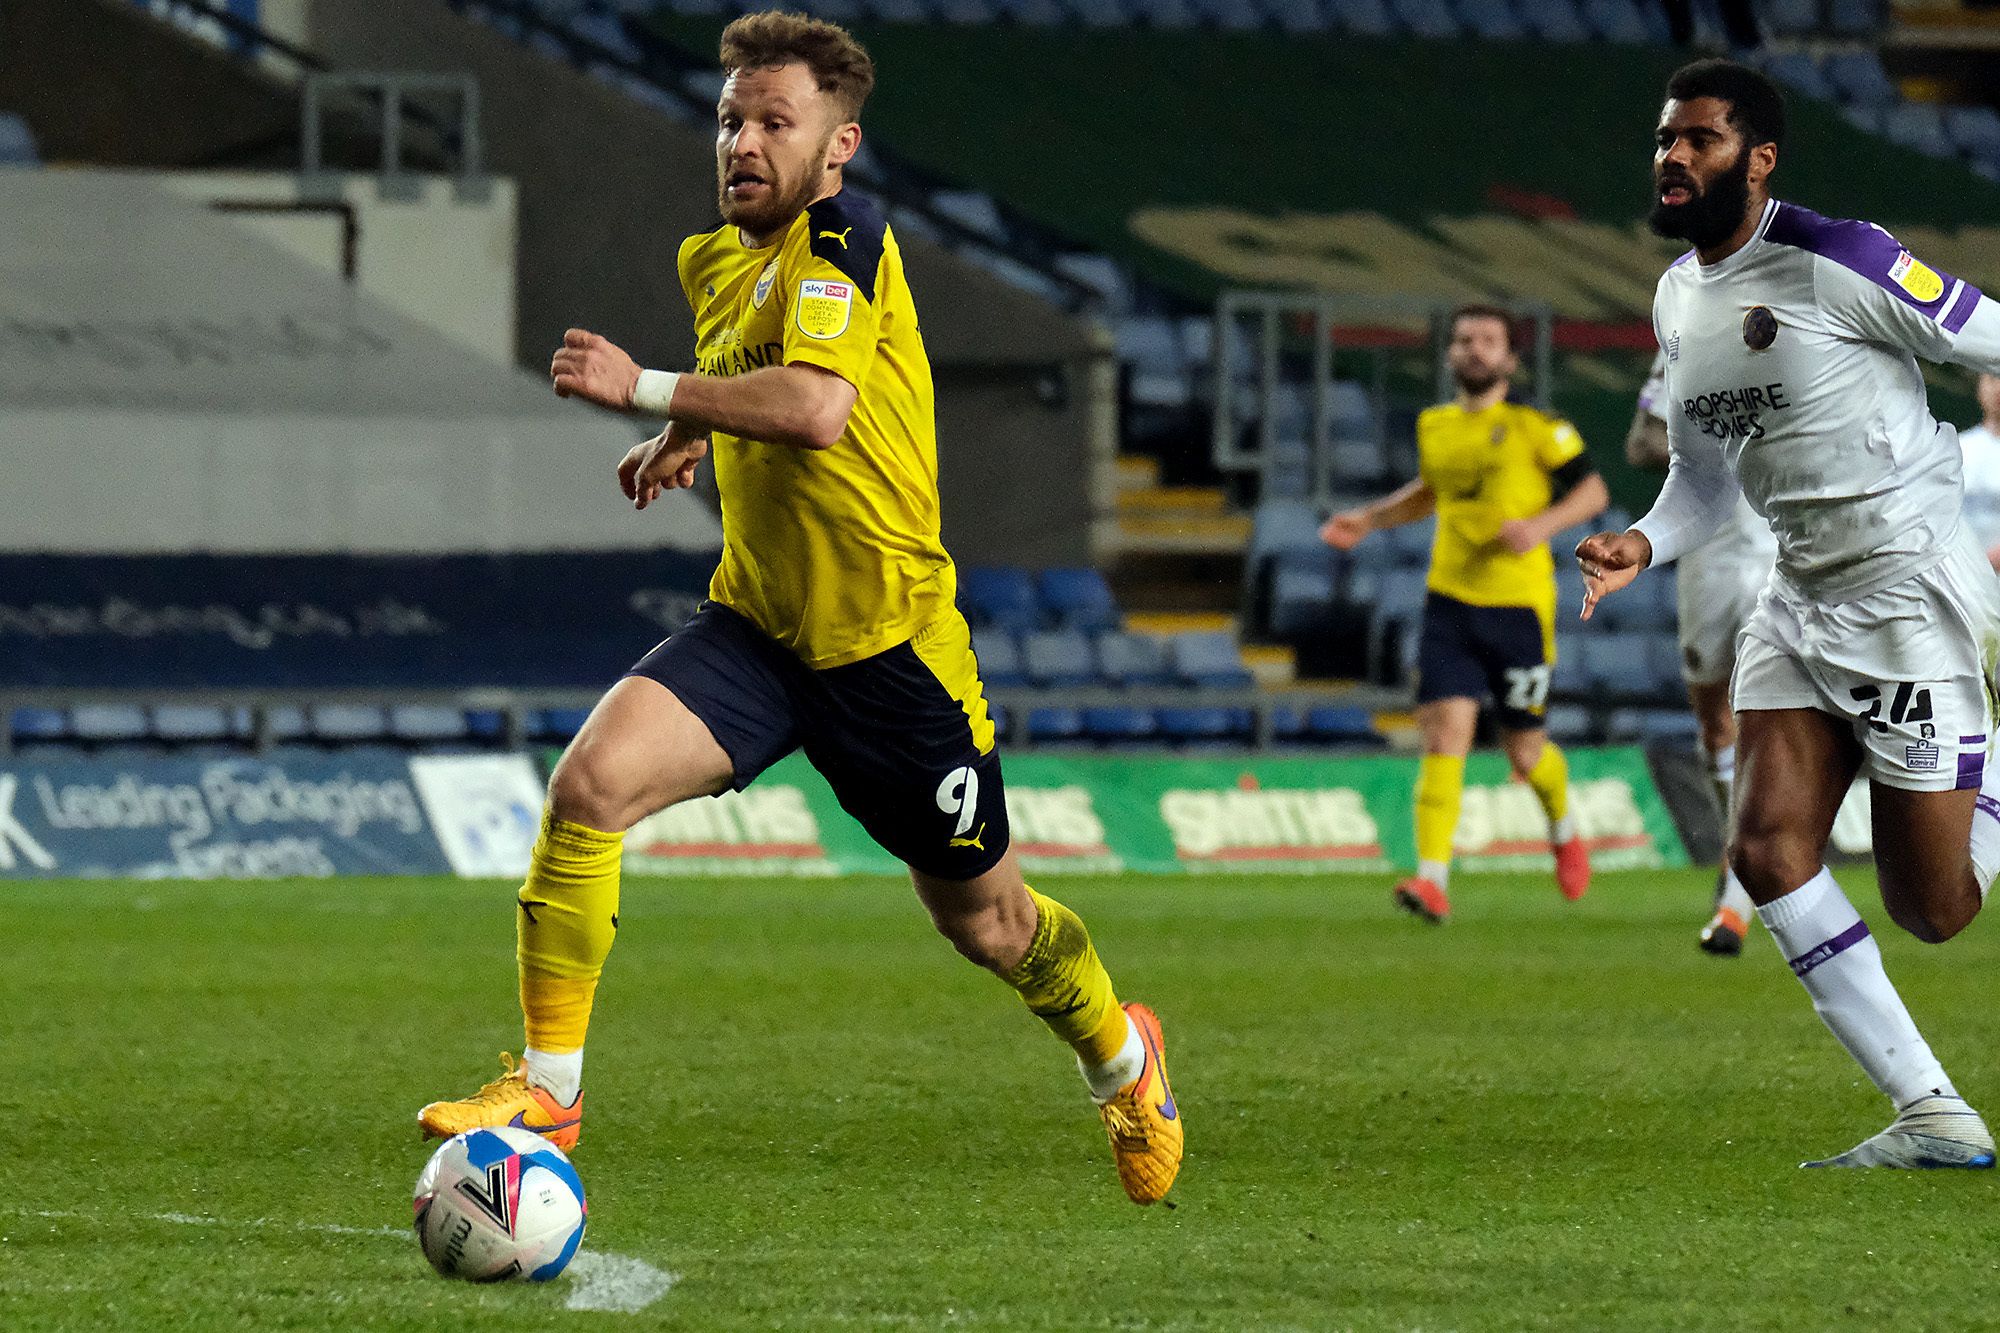 Oxford United's Matty Taylor aims for more League One goals